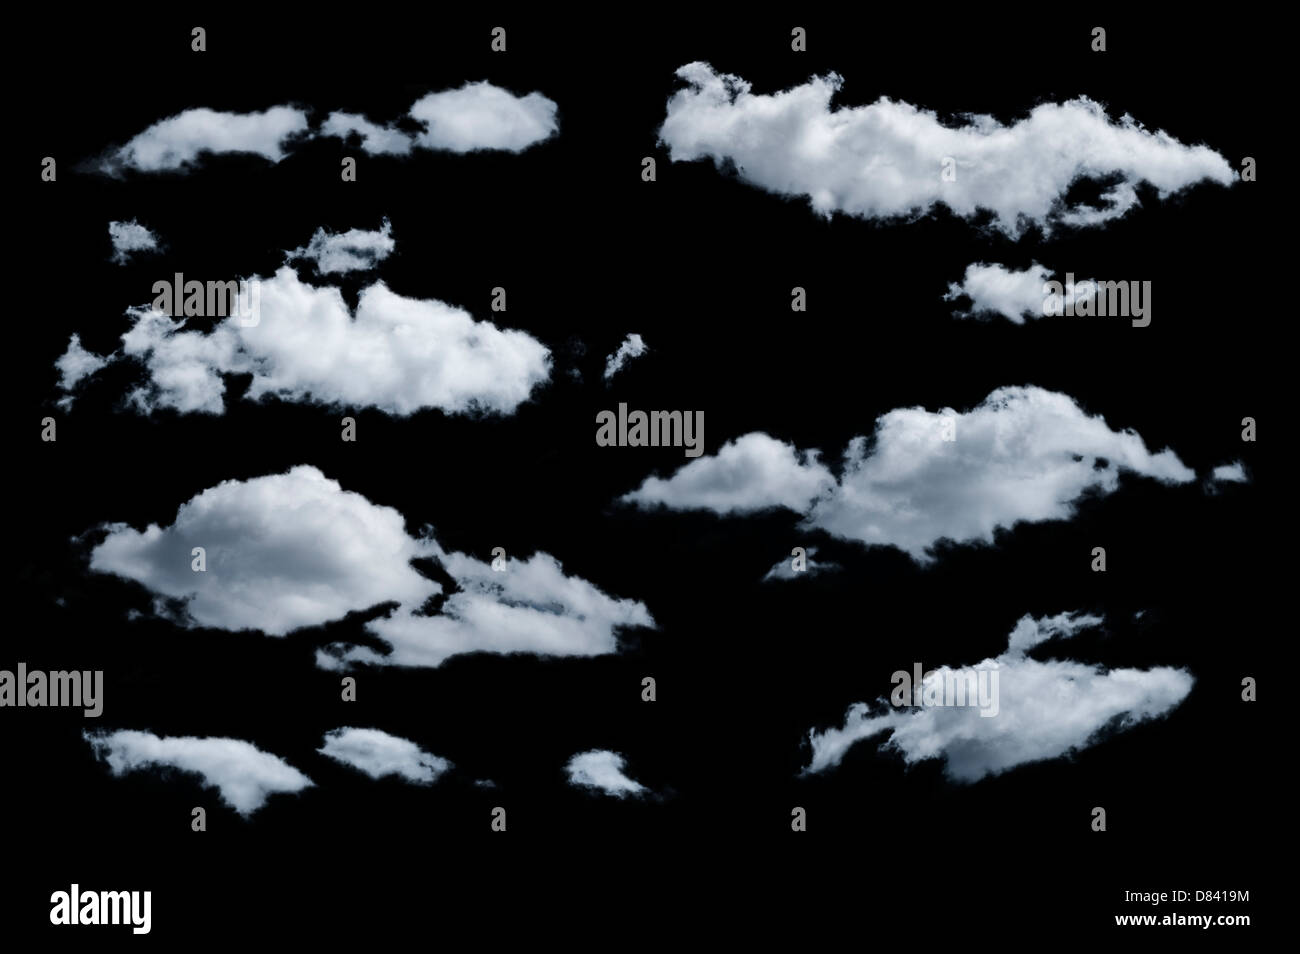 Set of isolated clouds. Desighn elements Stock Photo